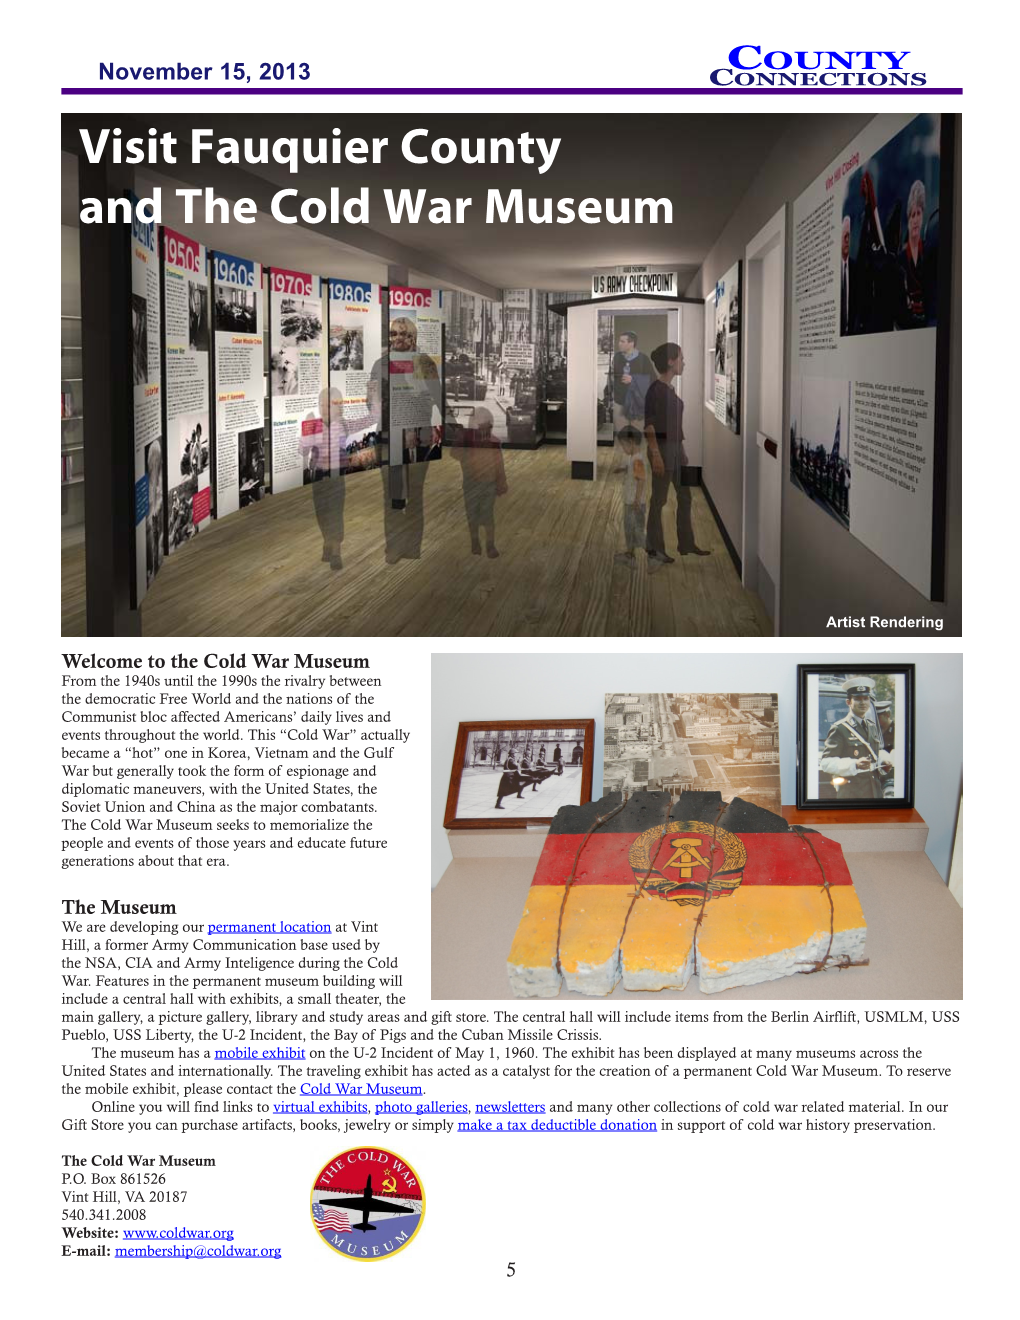 Visit Fauquier County and the Cold War Museum